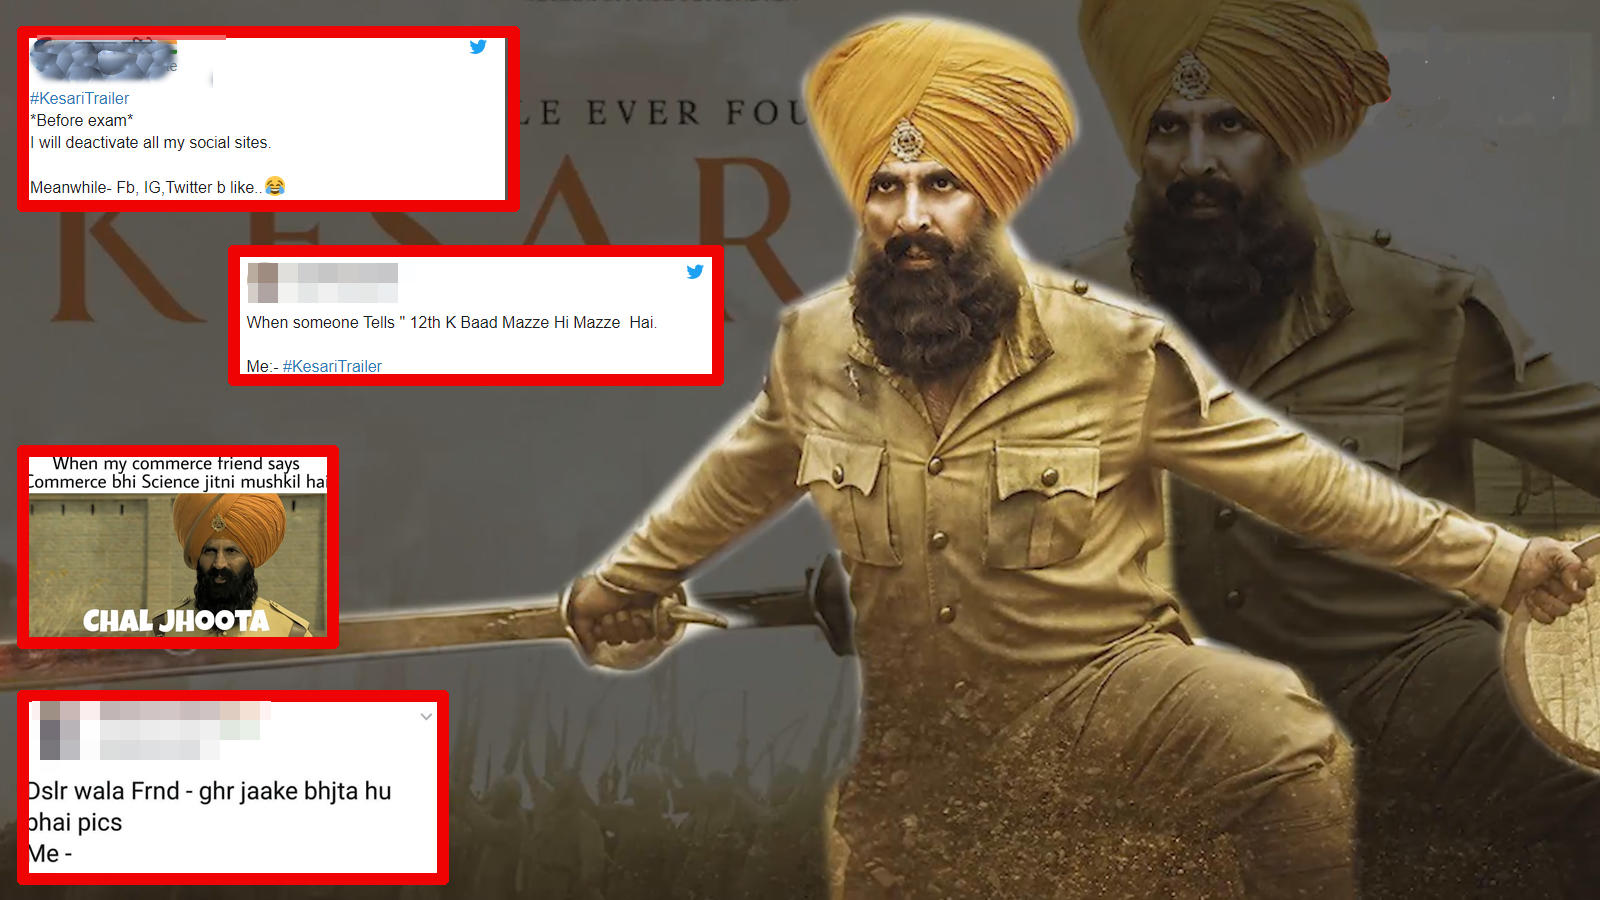 Akshay Kumar S Kesari Trailer Inspires A Hilarious Meme Fest On The Internet Hindi Movie News Bollywood Times Of India They wouldn't even know make the funniest memes in your group of friends. akshay kumar s kesari trailer inspires a hilarious meme fest on the internet